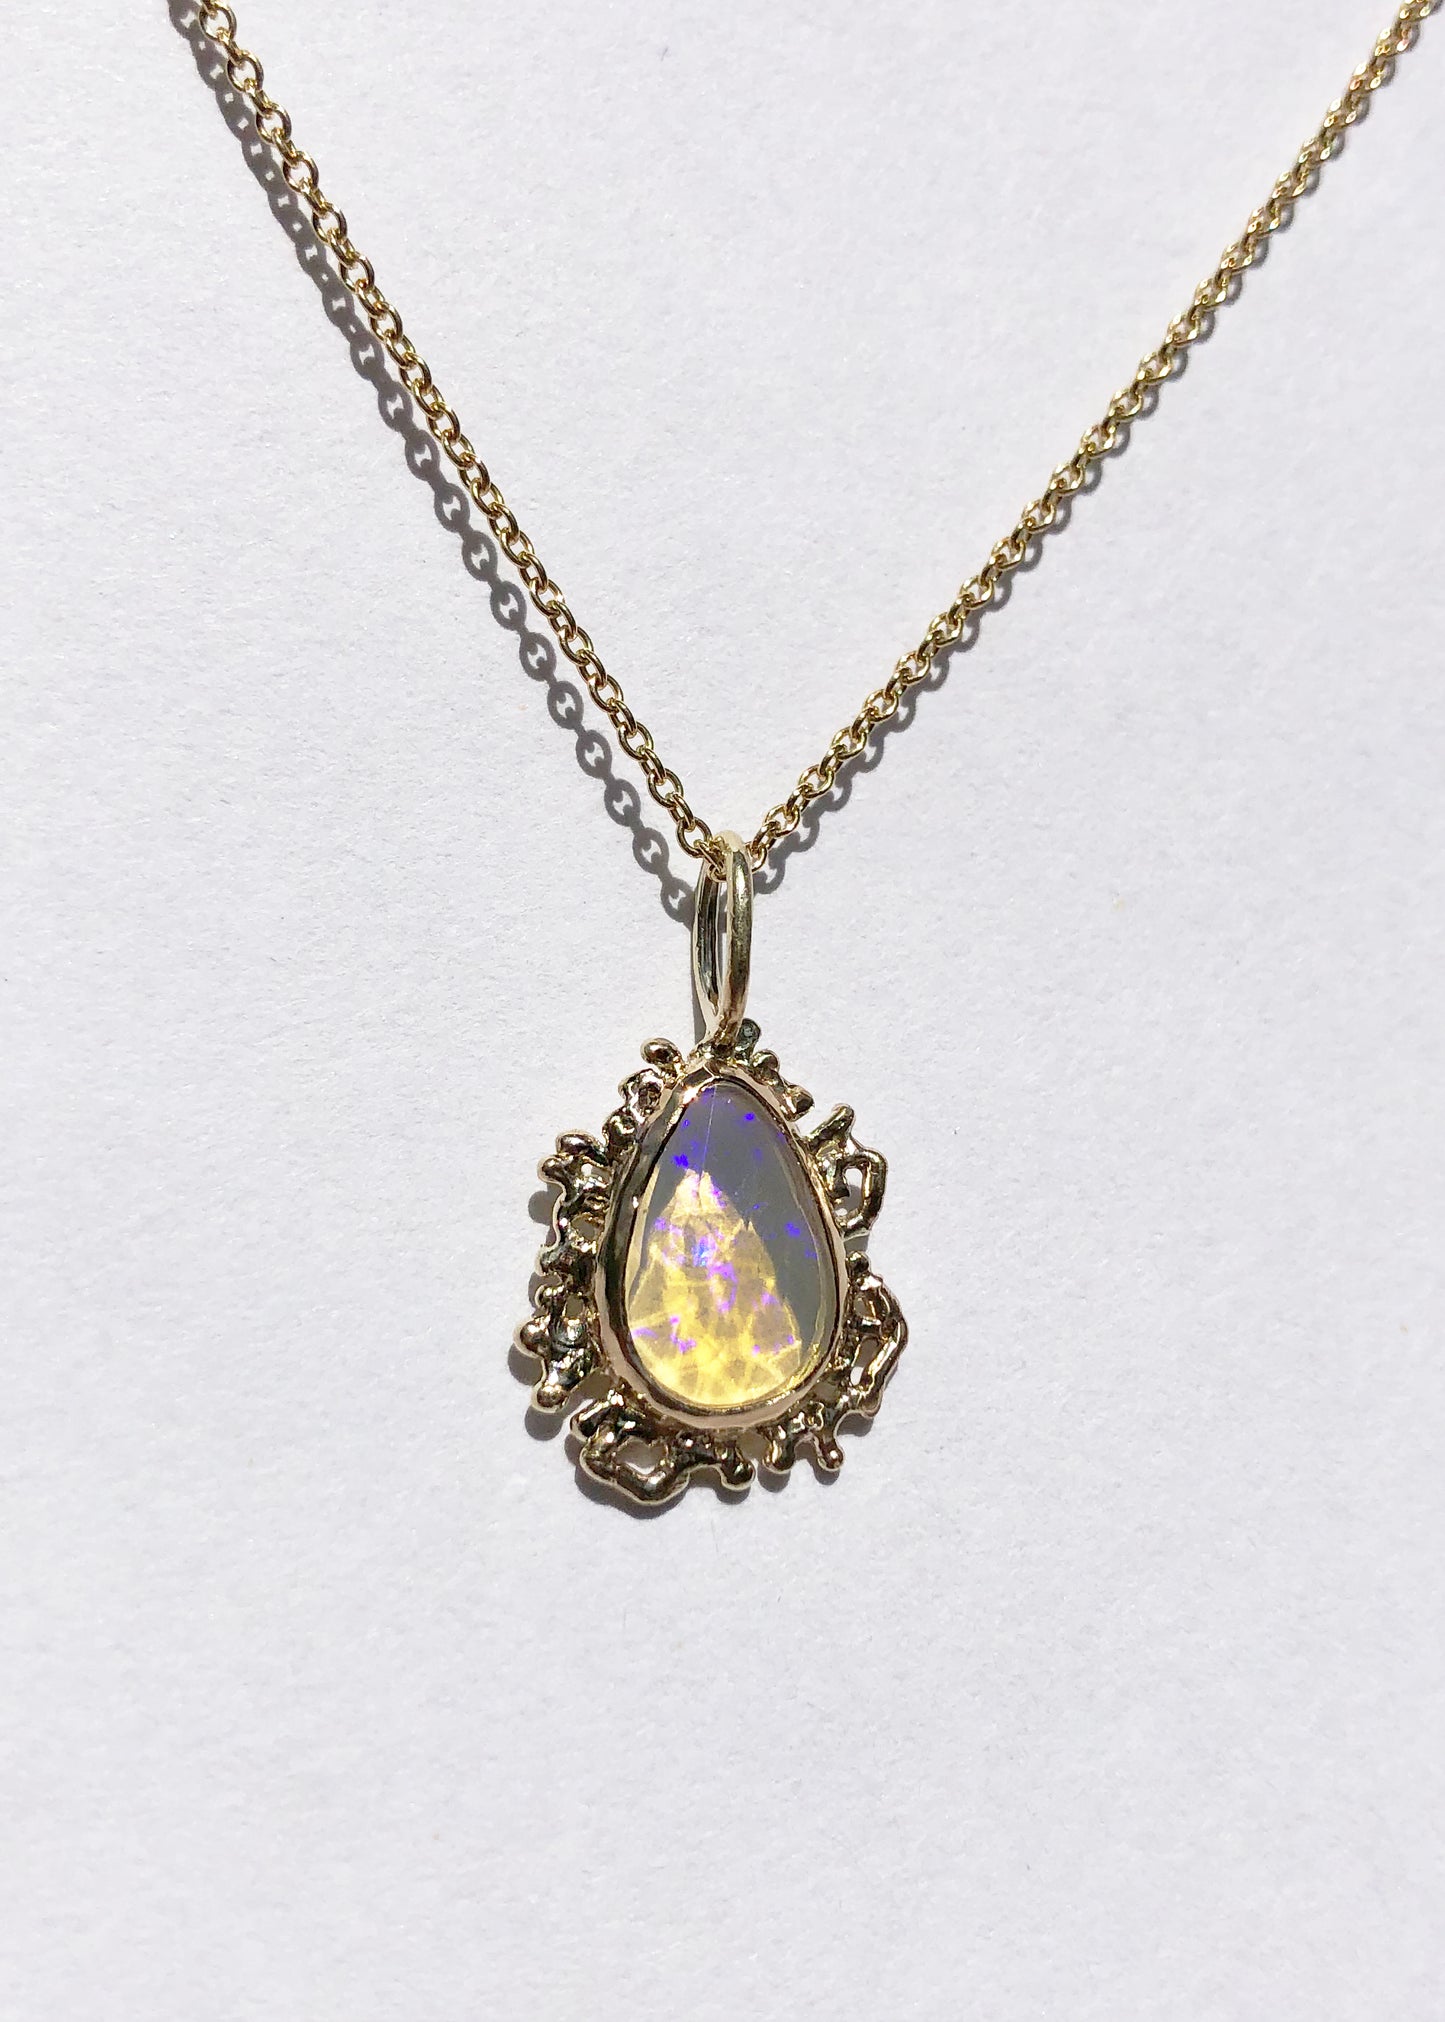 Fairmined gold pendant with opal / ULTRA VIOLET